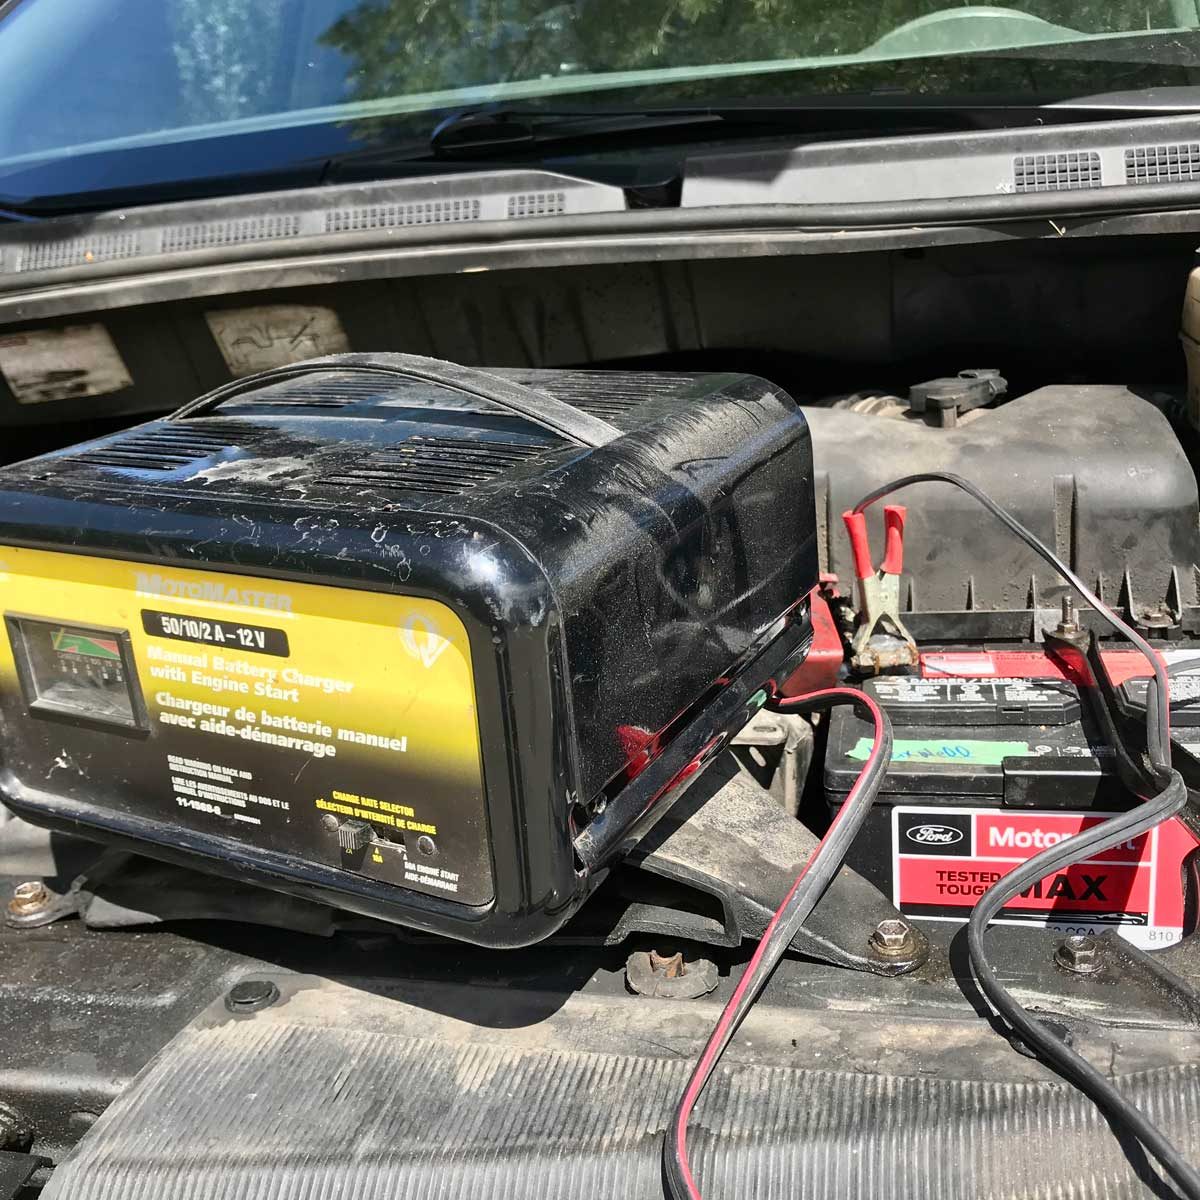 A Step-by-Step Guide to Charging a Car Battery | Family Handyman